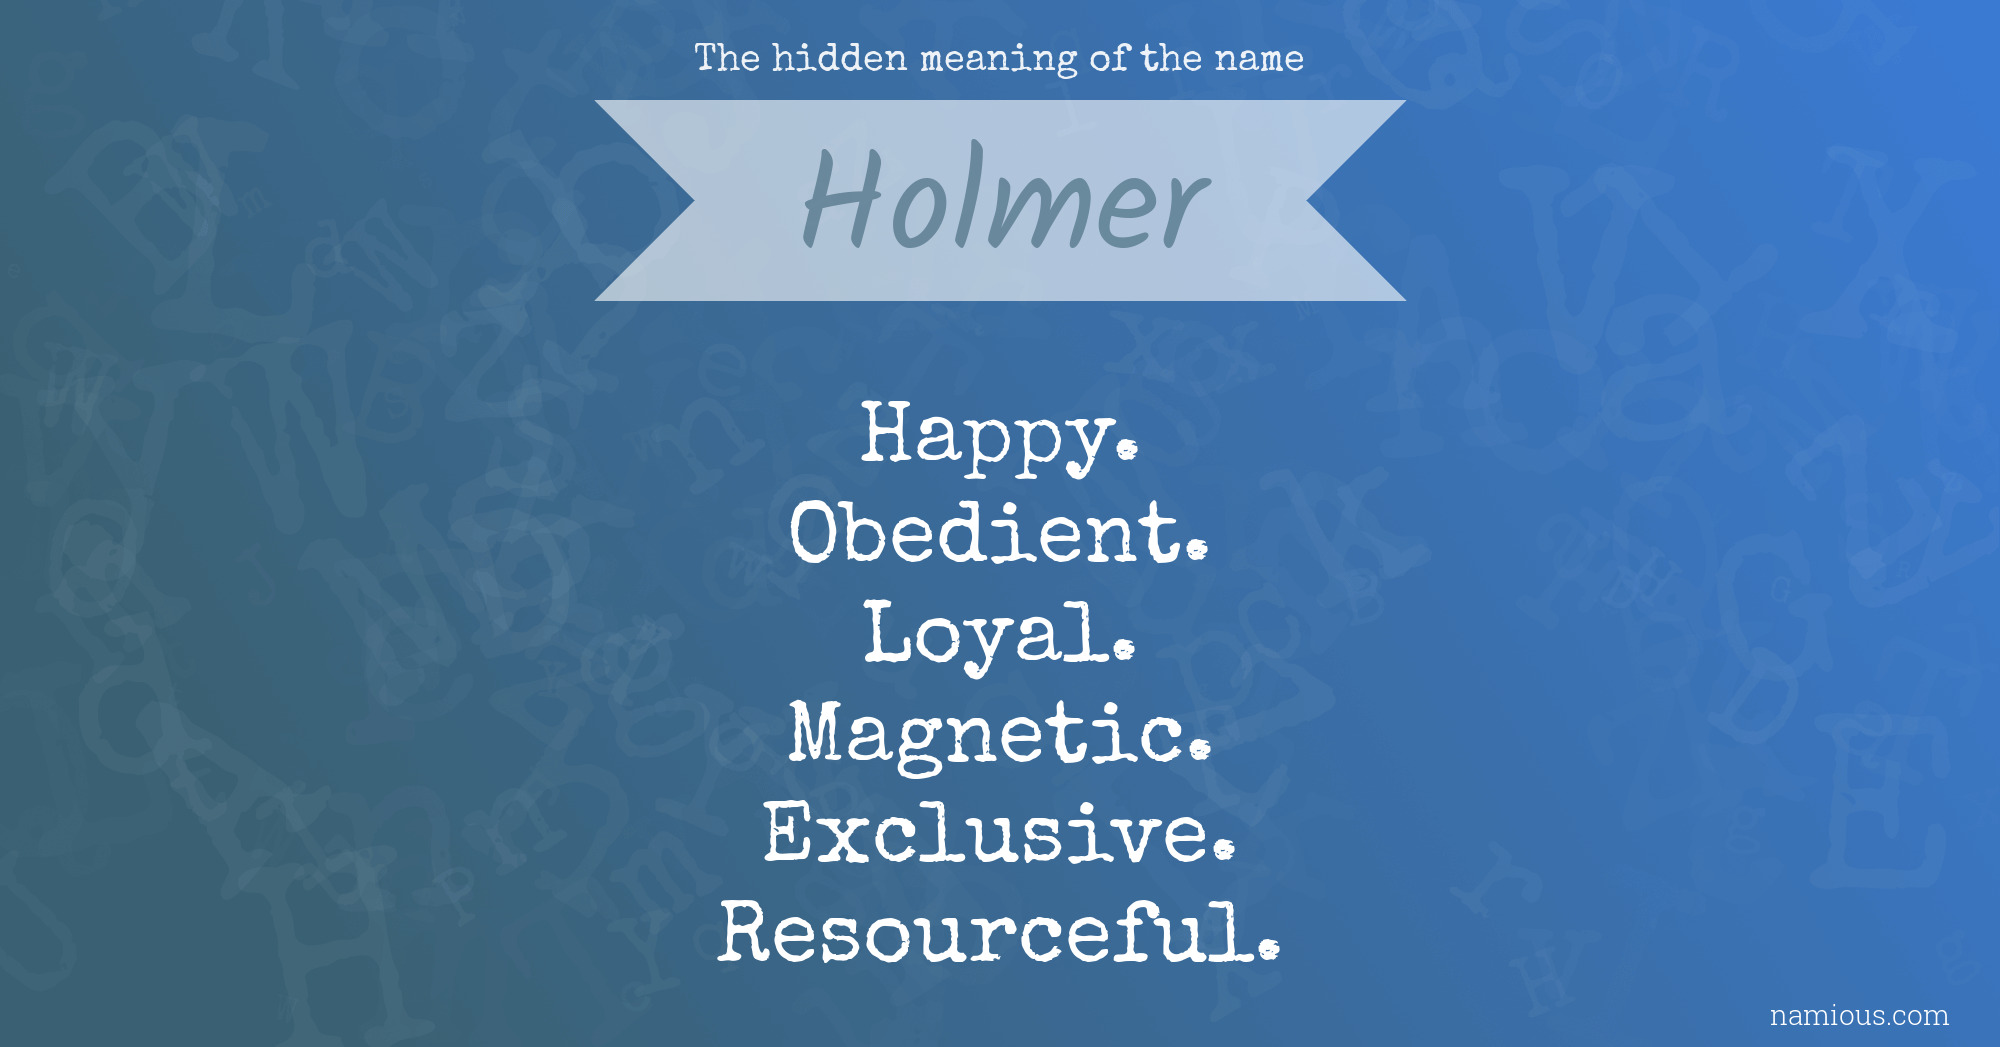 The hidden meaning of the name Holmer